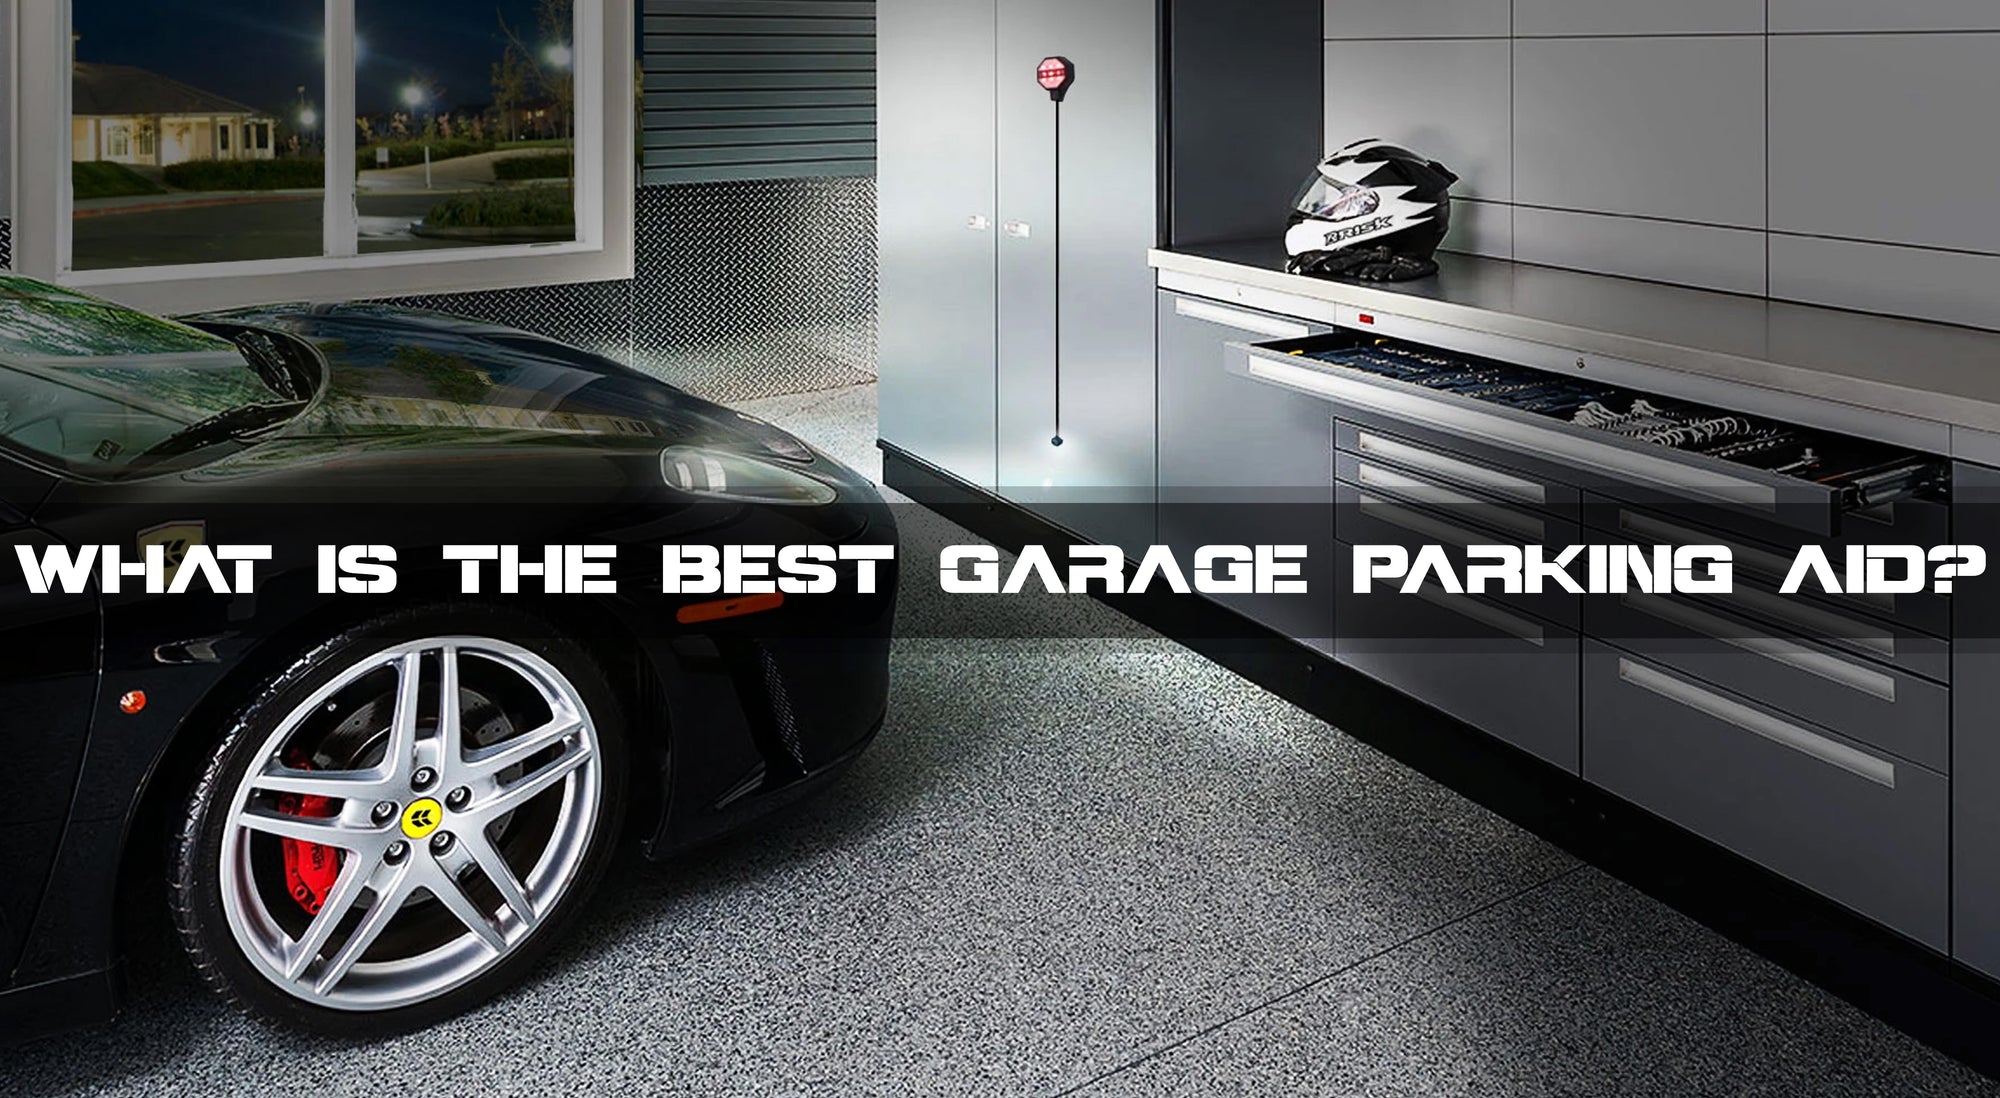 What is the Best Garage Parking Aid?